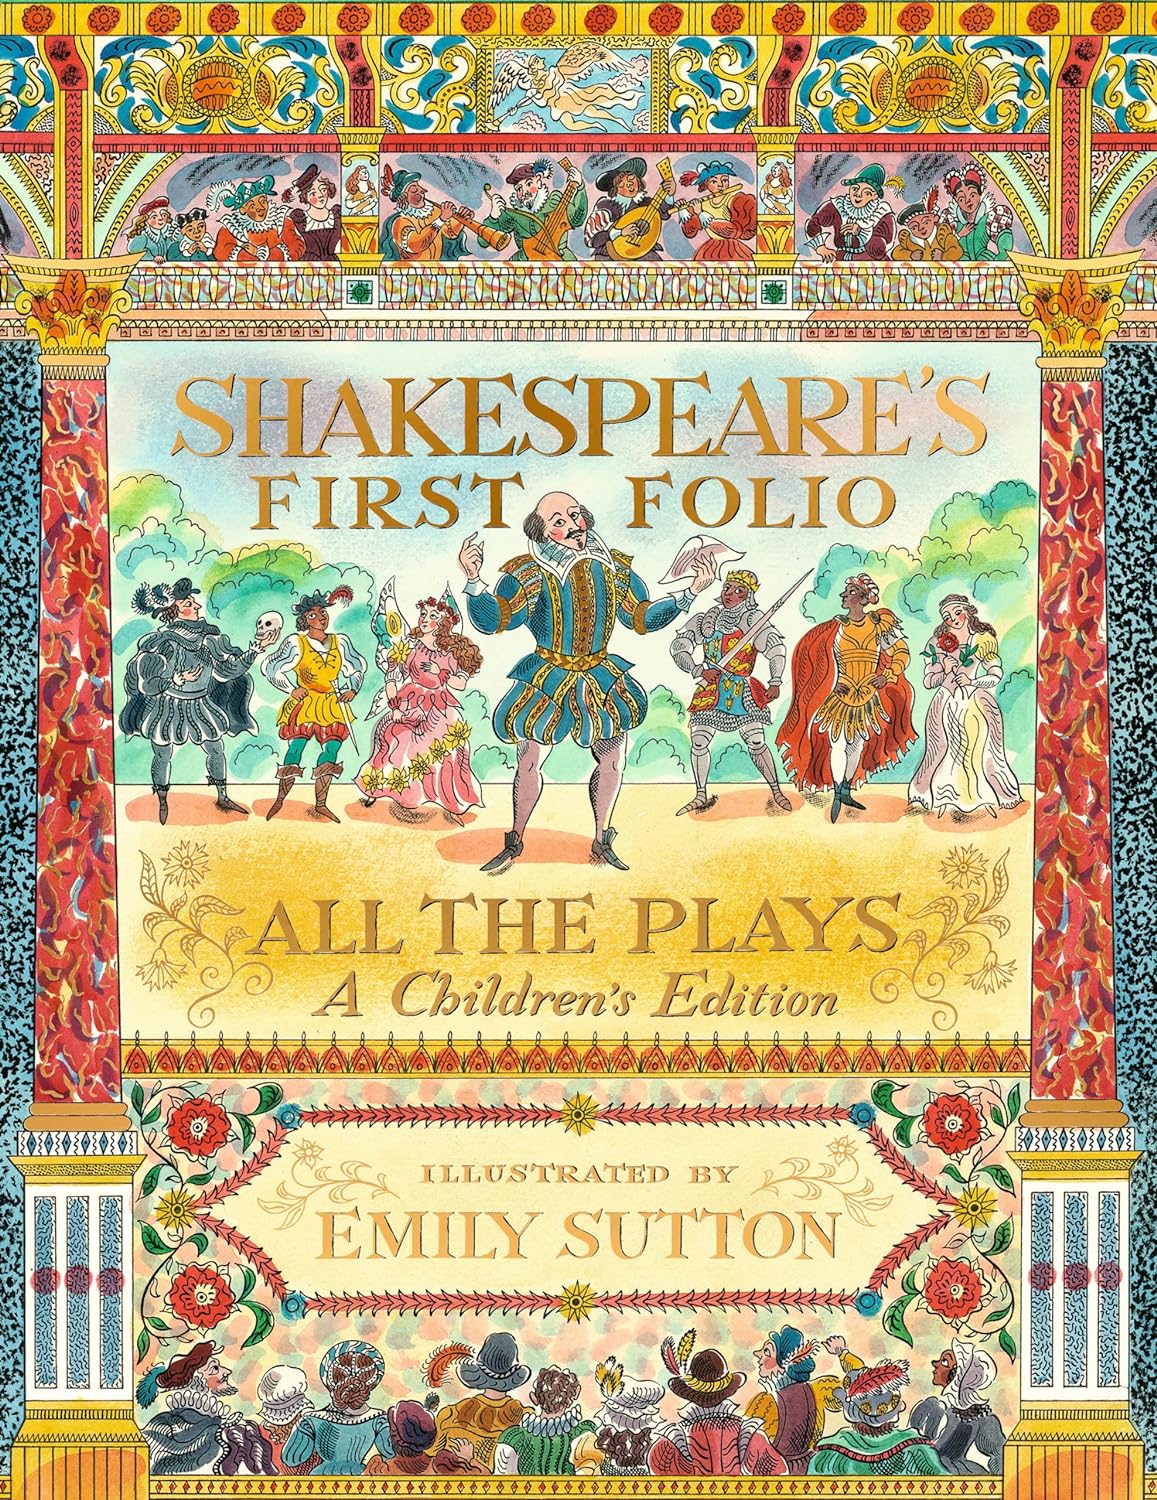 Shakespeare's First Folio. All the plays: A Children's Edition, illustrated by Emily Sutton